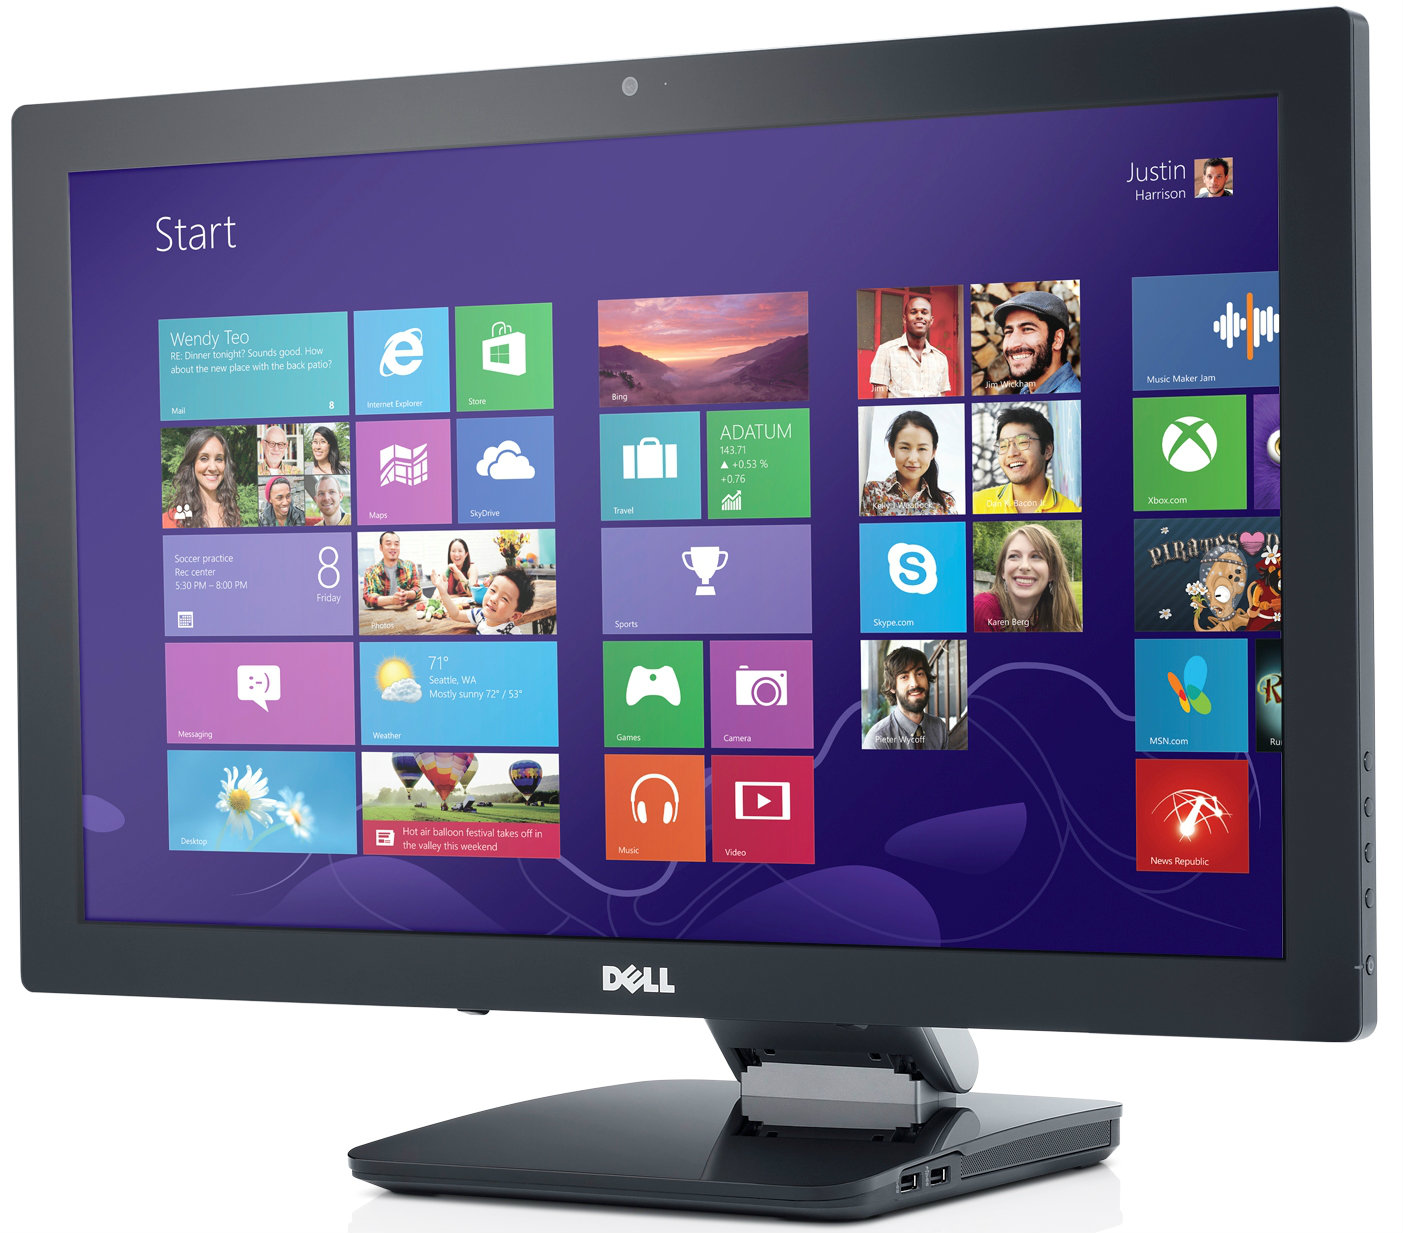 1050.Dell-S2340T-multi-touch-Windows-8-monitor-front